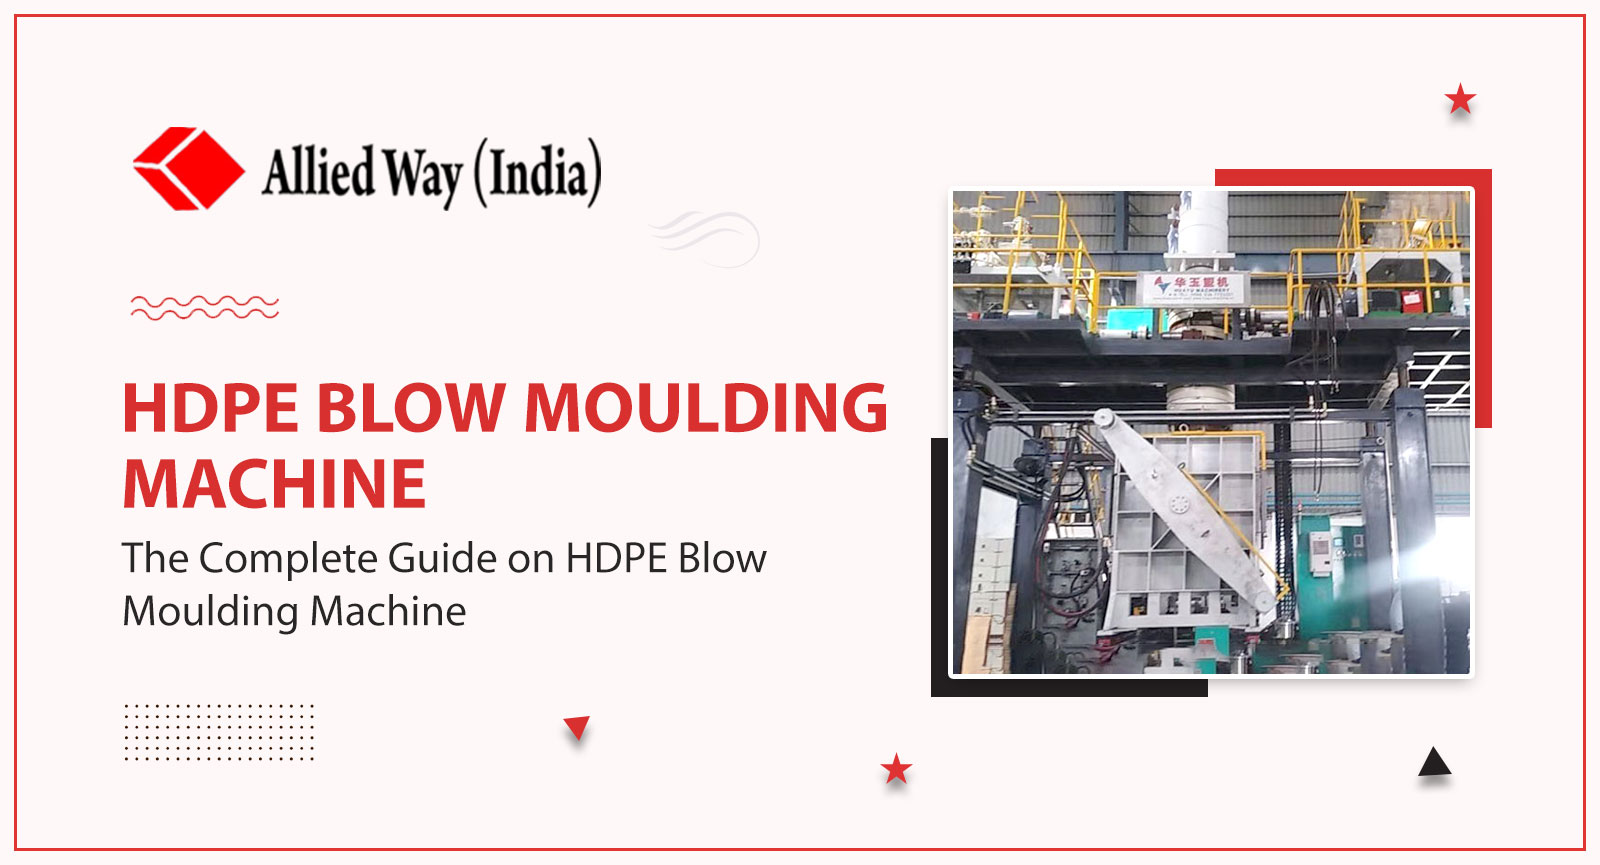 The Complete Guide on HDPE Blow Moulding Machine, Allied Way (India)